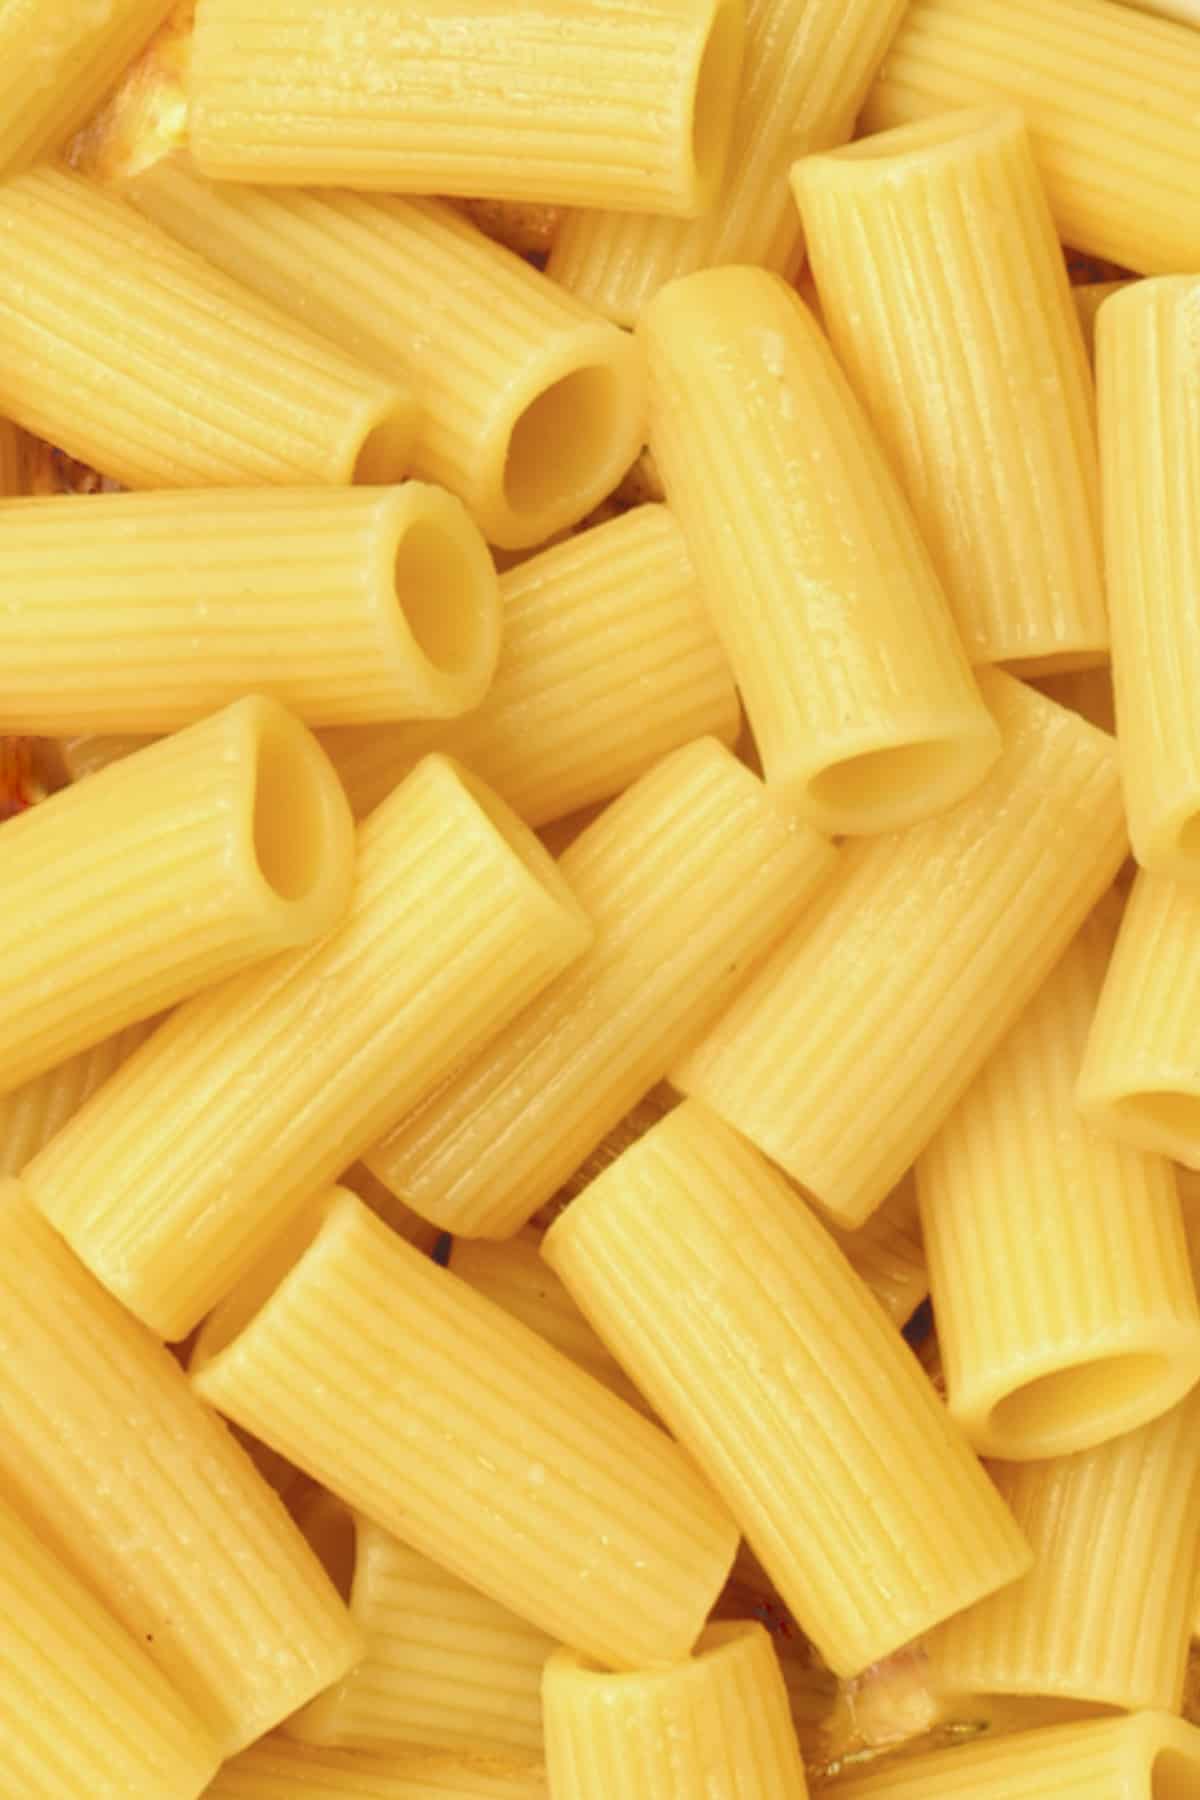 Cooked pasta